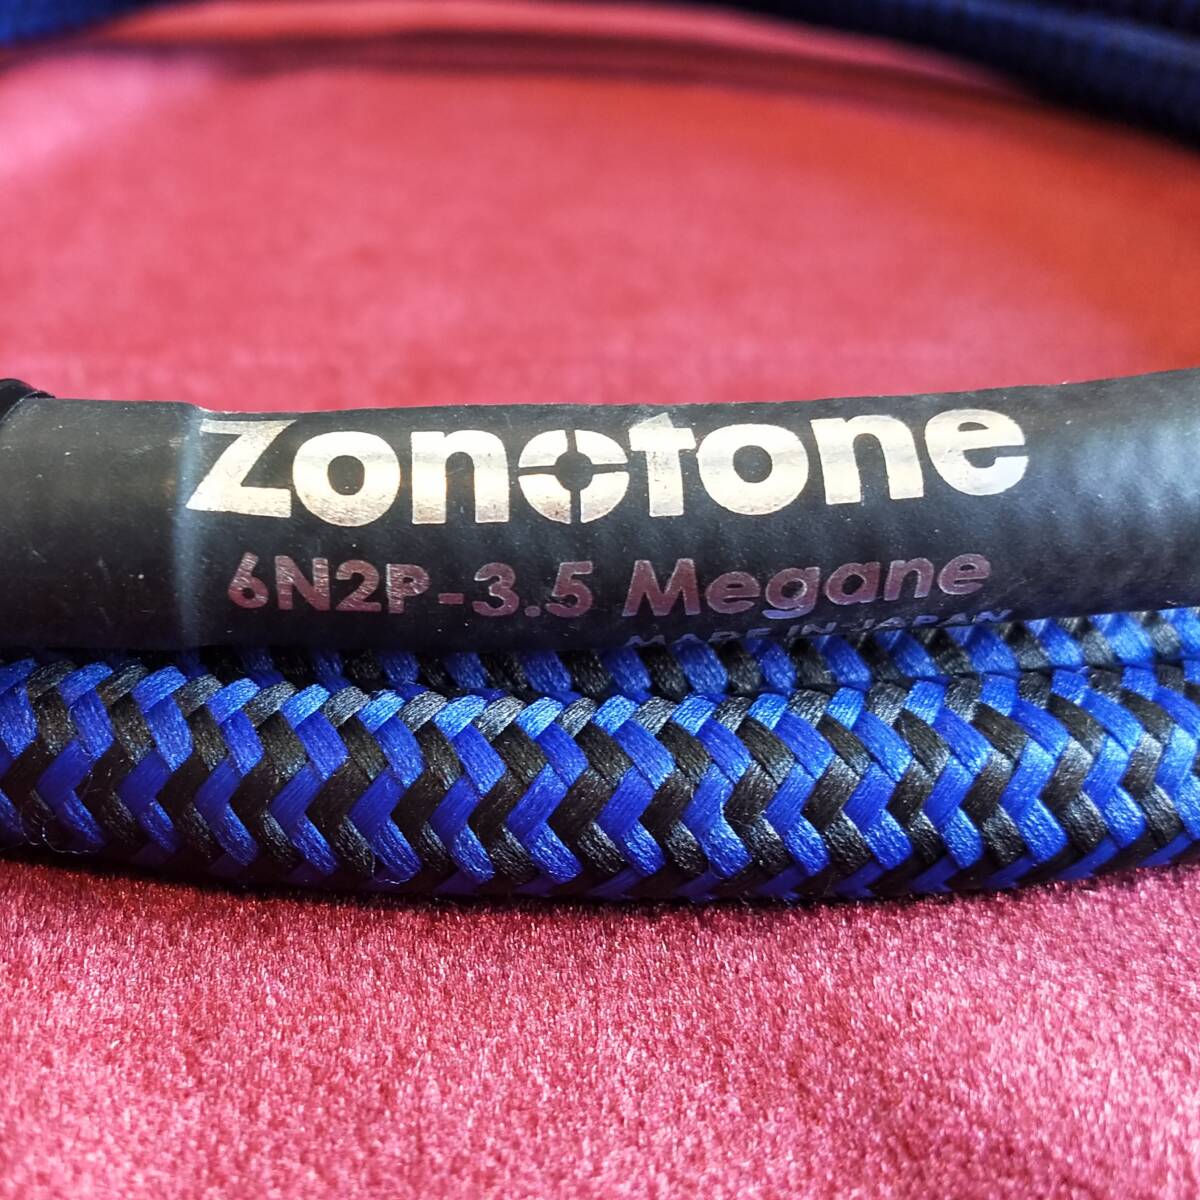 【Hi-End POWER CABLE】ZONOTONE(ゾノトーン) 6N2P-3.5 Megane Made in Japan その2【中古動作品】_画像2